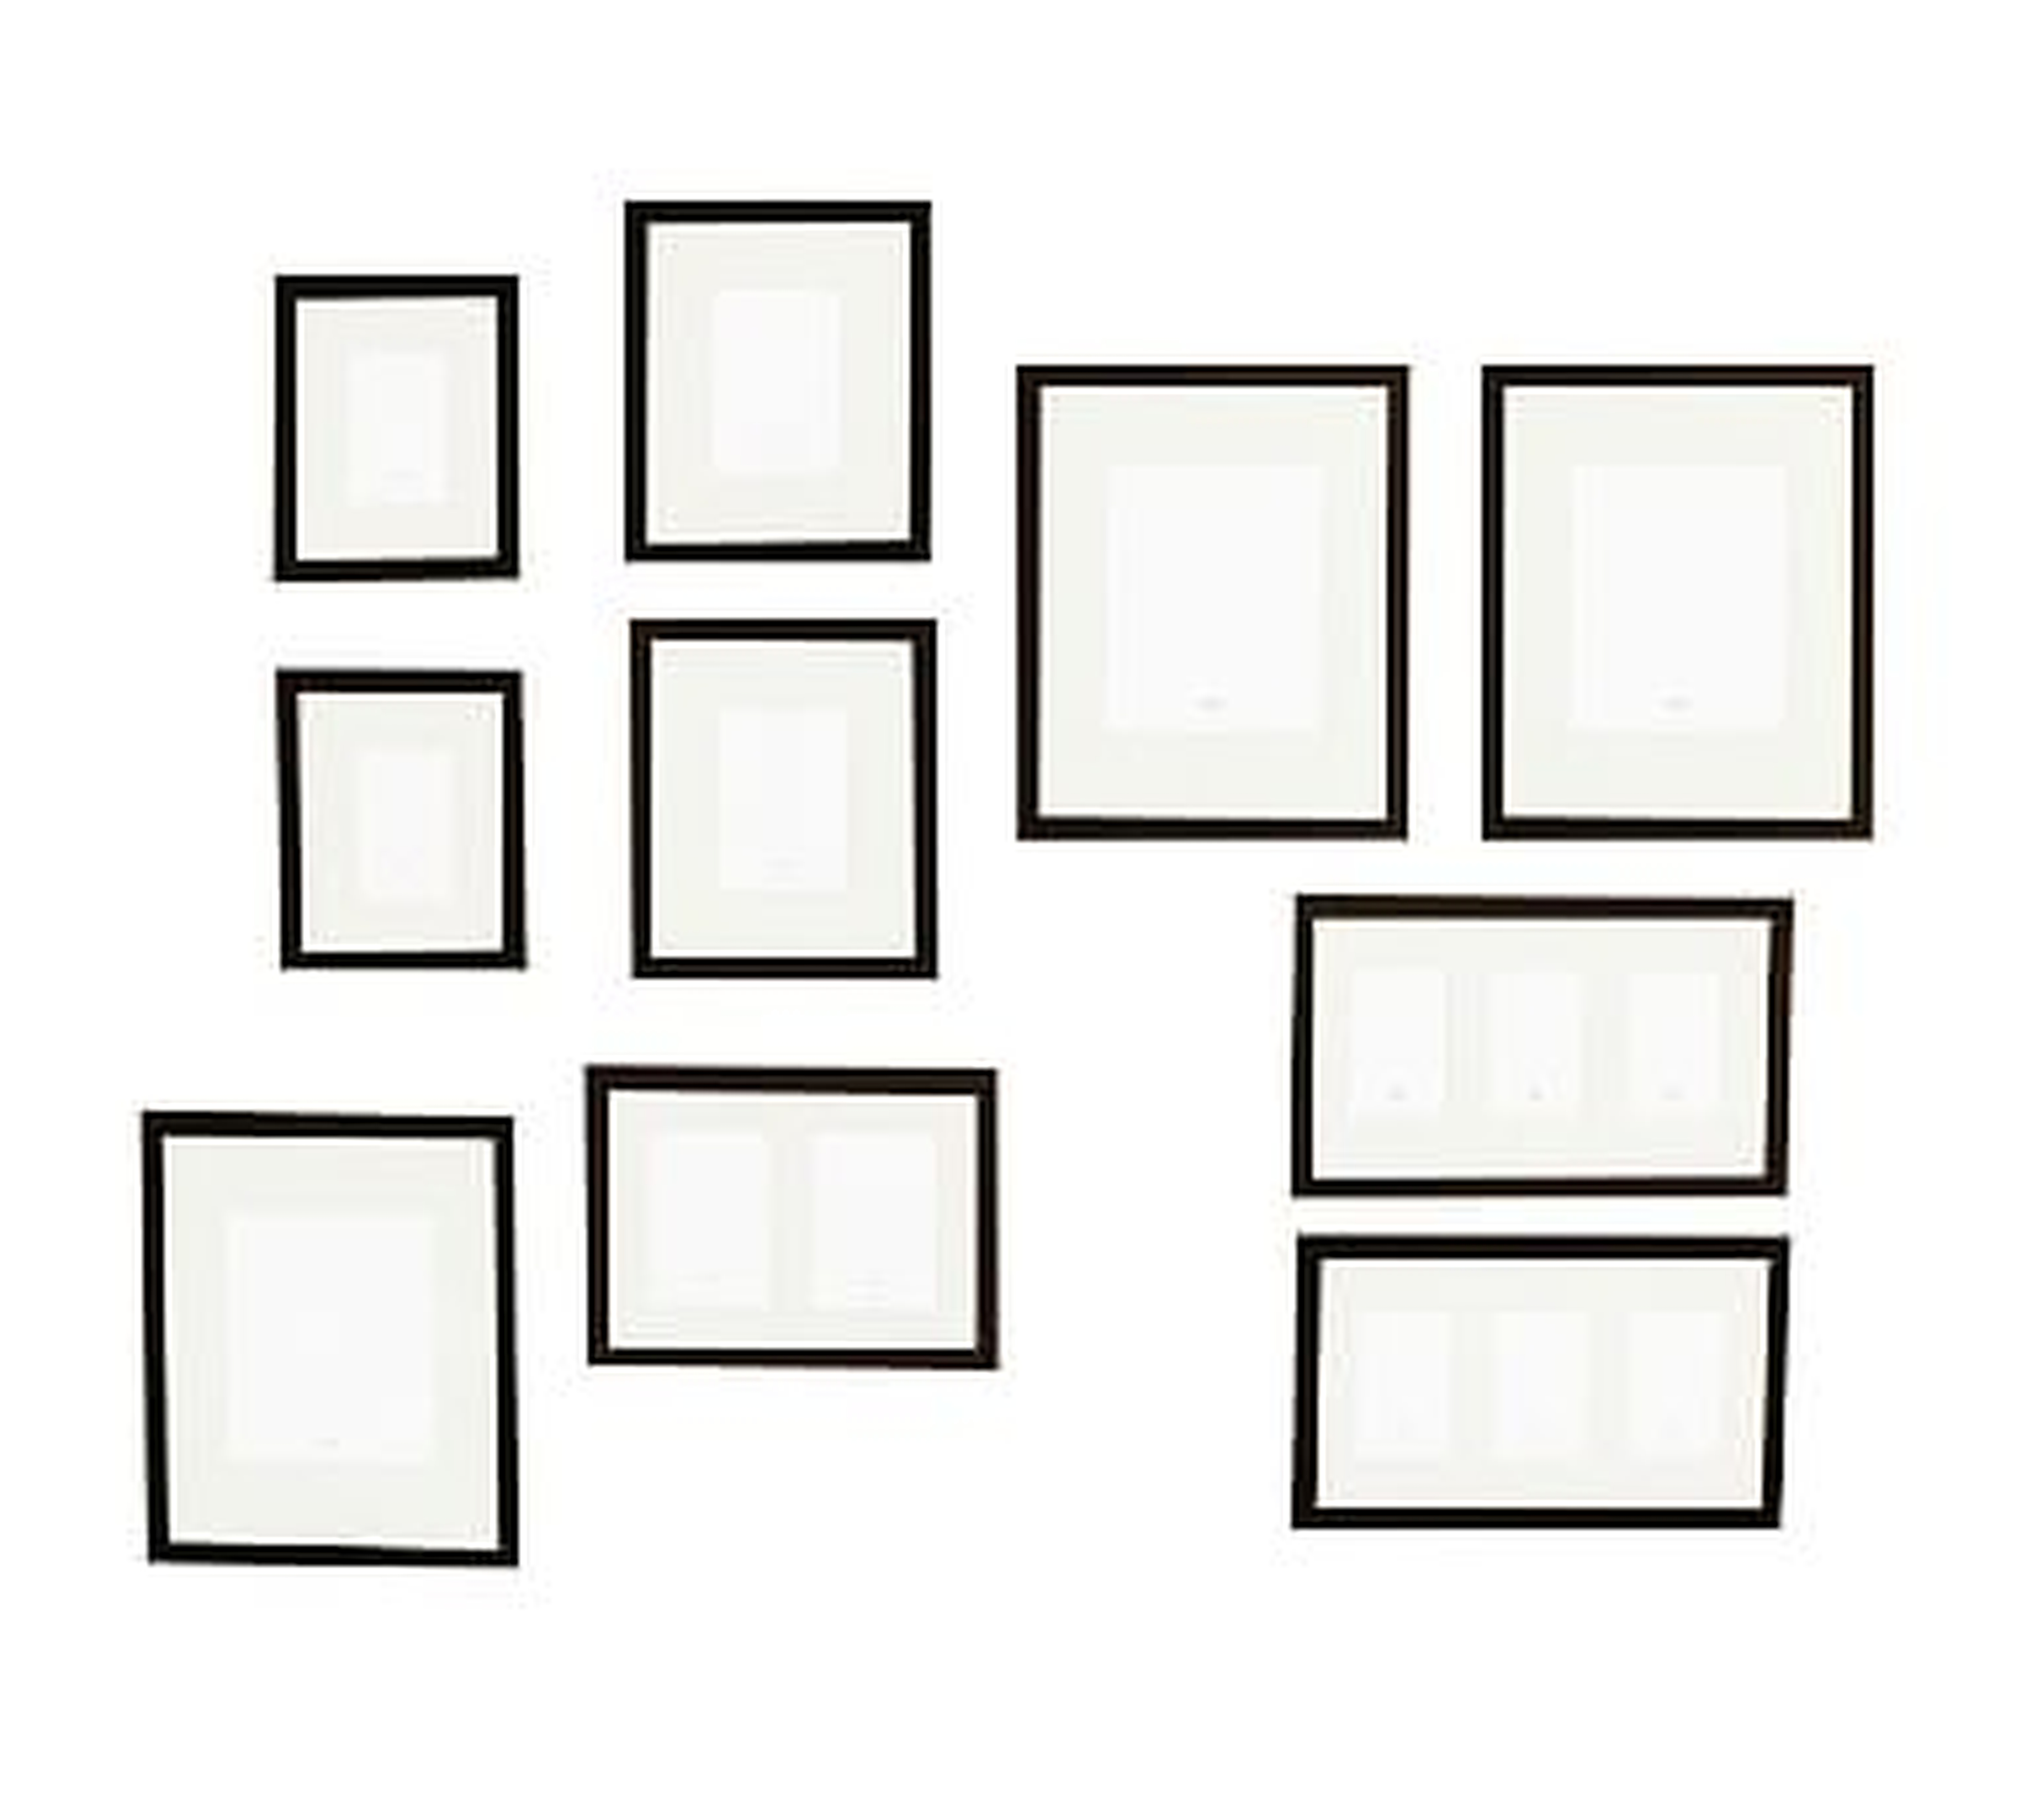 Gallery in a Box, Black Frames, Set of 10 - Pottery Barn